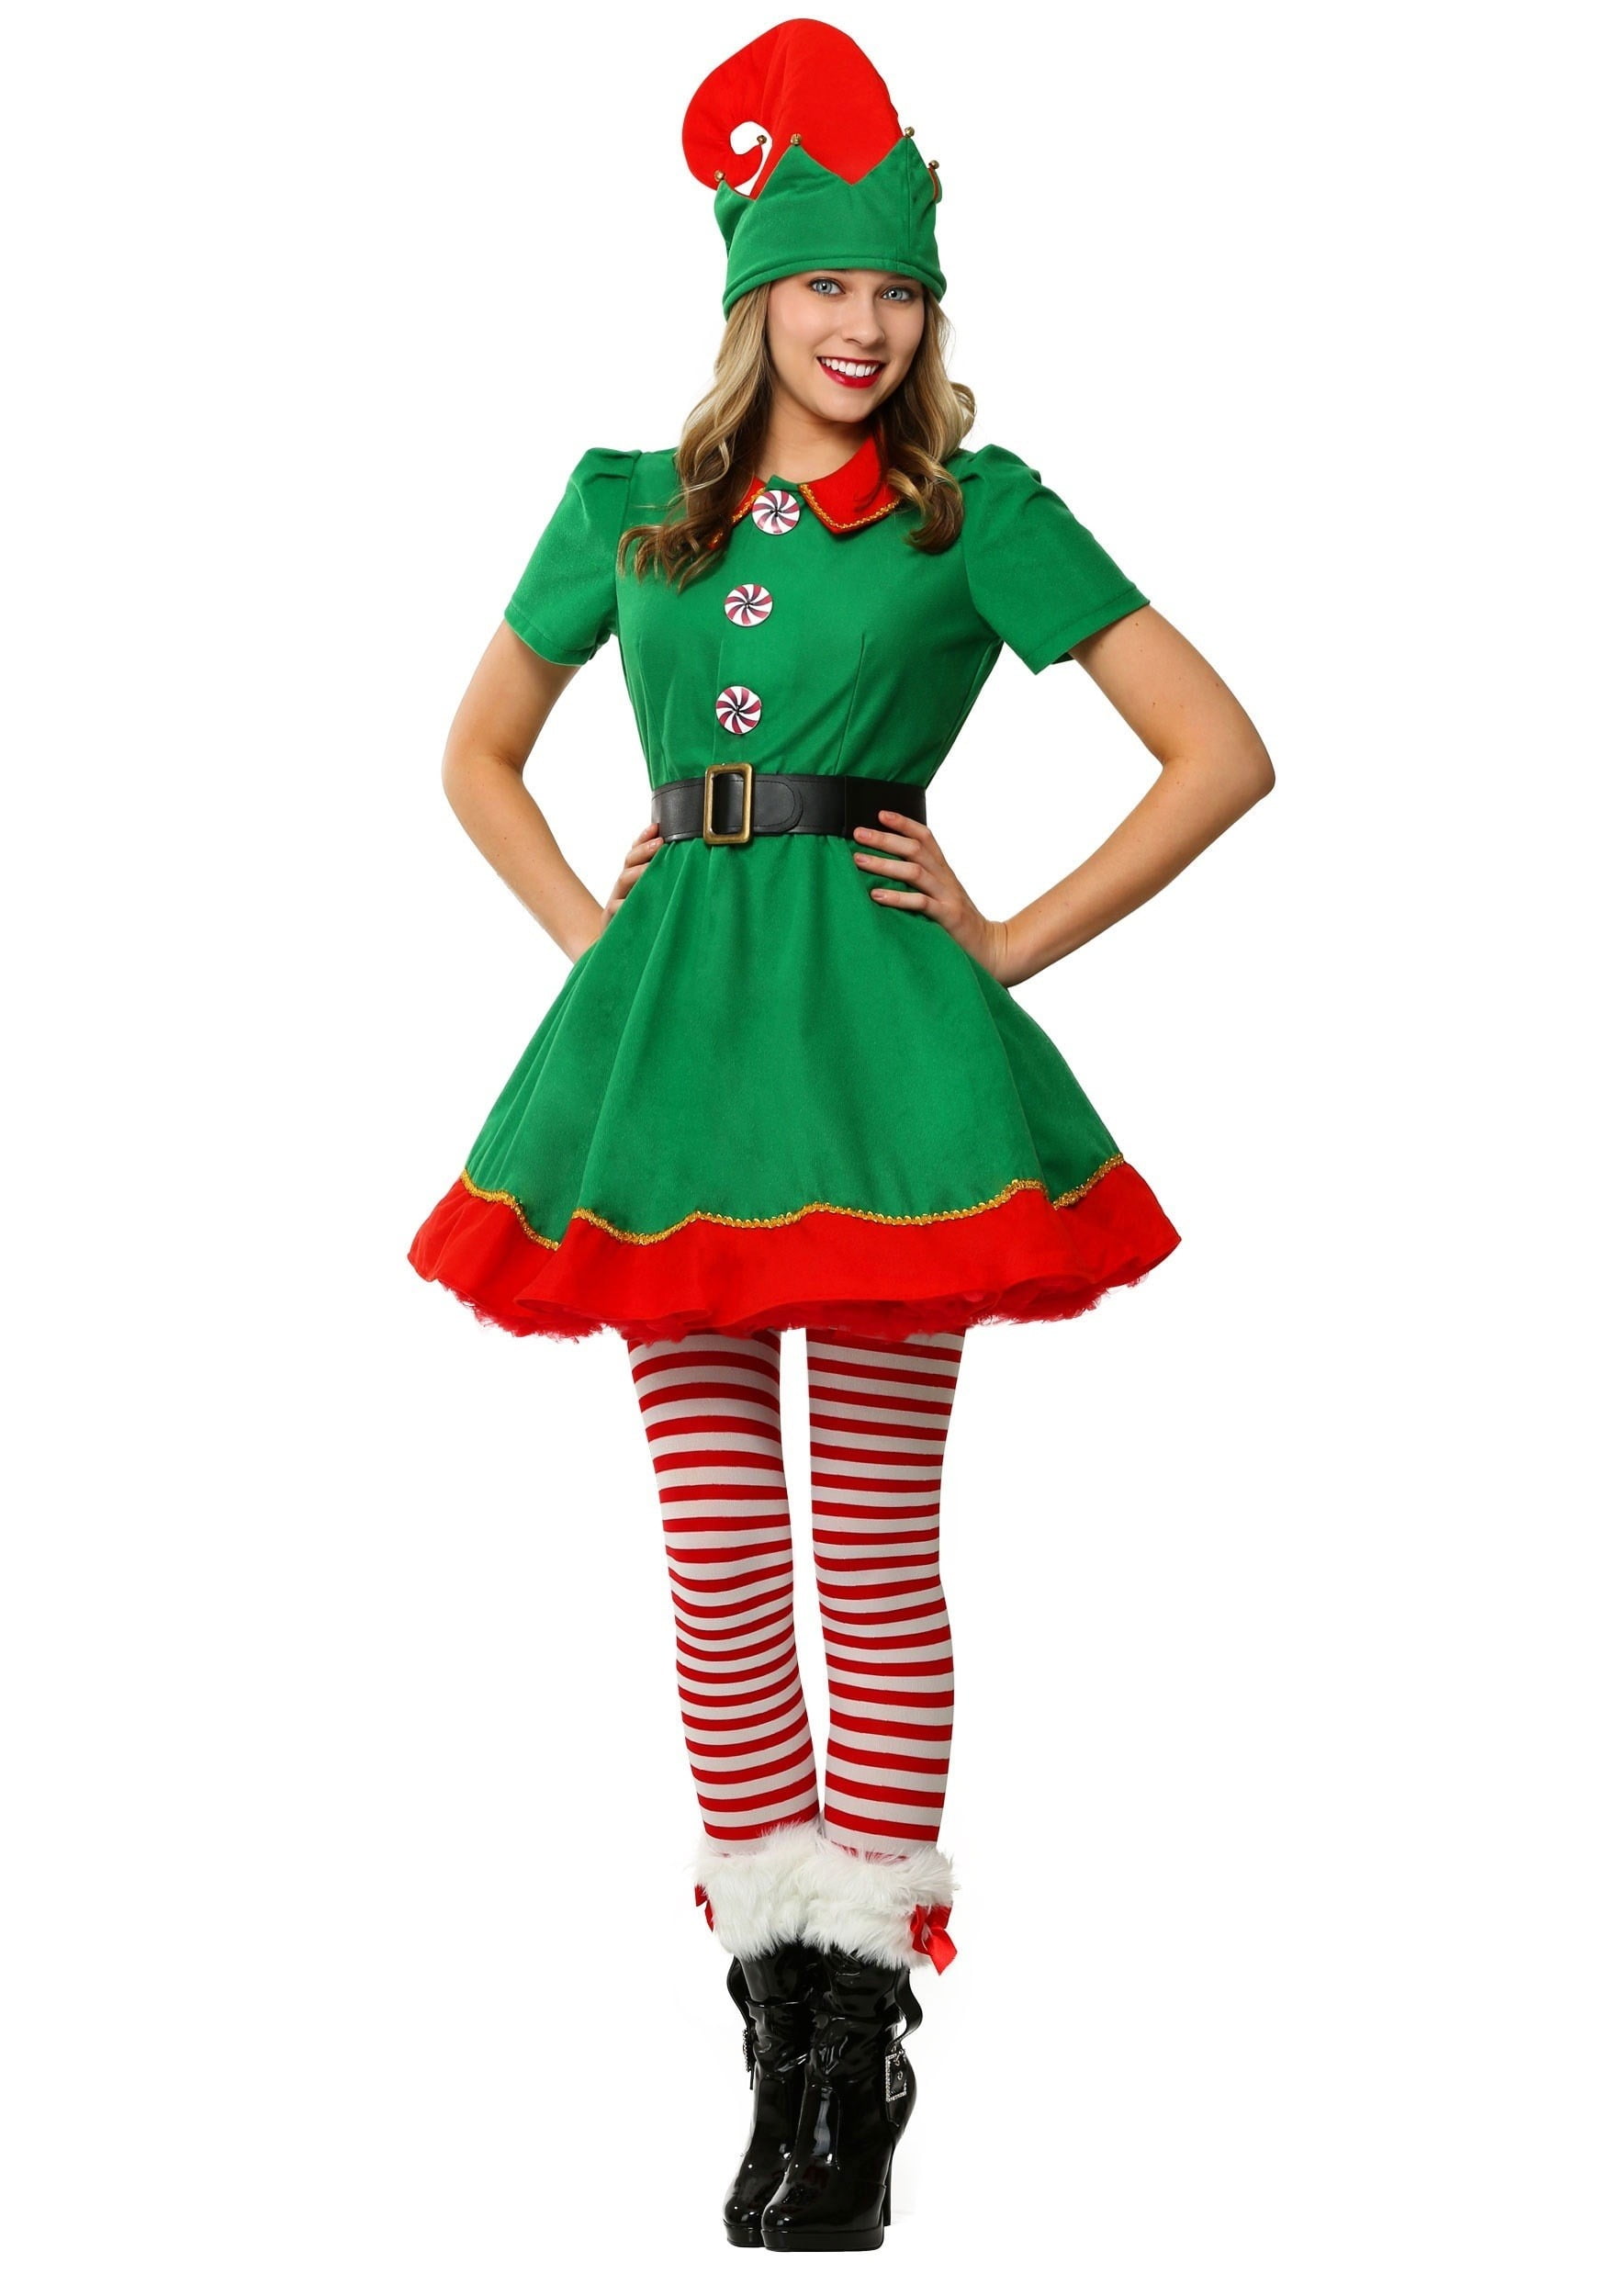 ELF ADULT CHRISTMAS COSTUME PARTY DRESS  HAT and SHOES 